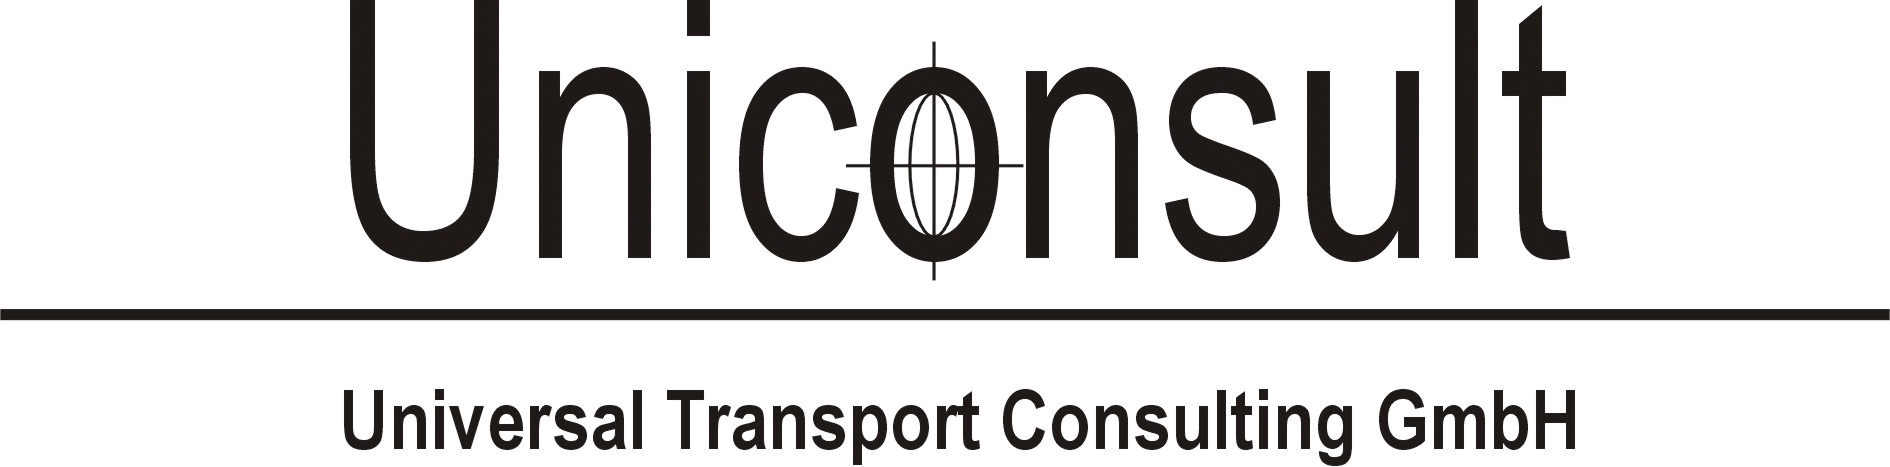 UNICONSULT Universal Transport Consulting GmbH, UNICONSULT Universal Transport Consulting GmbH